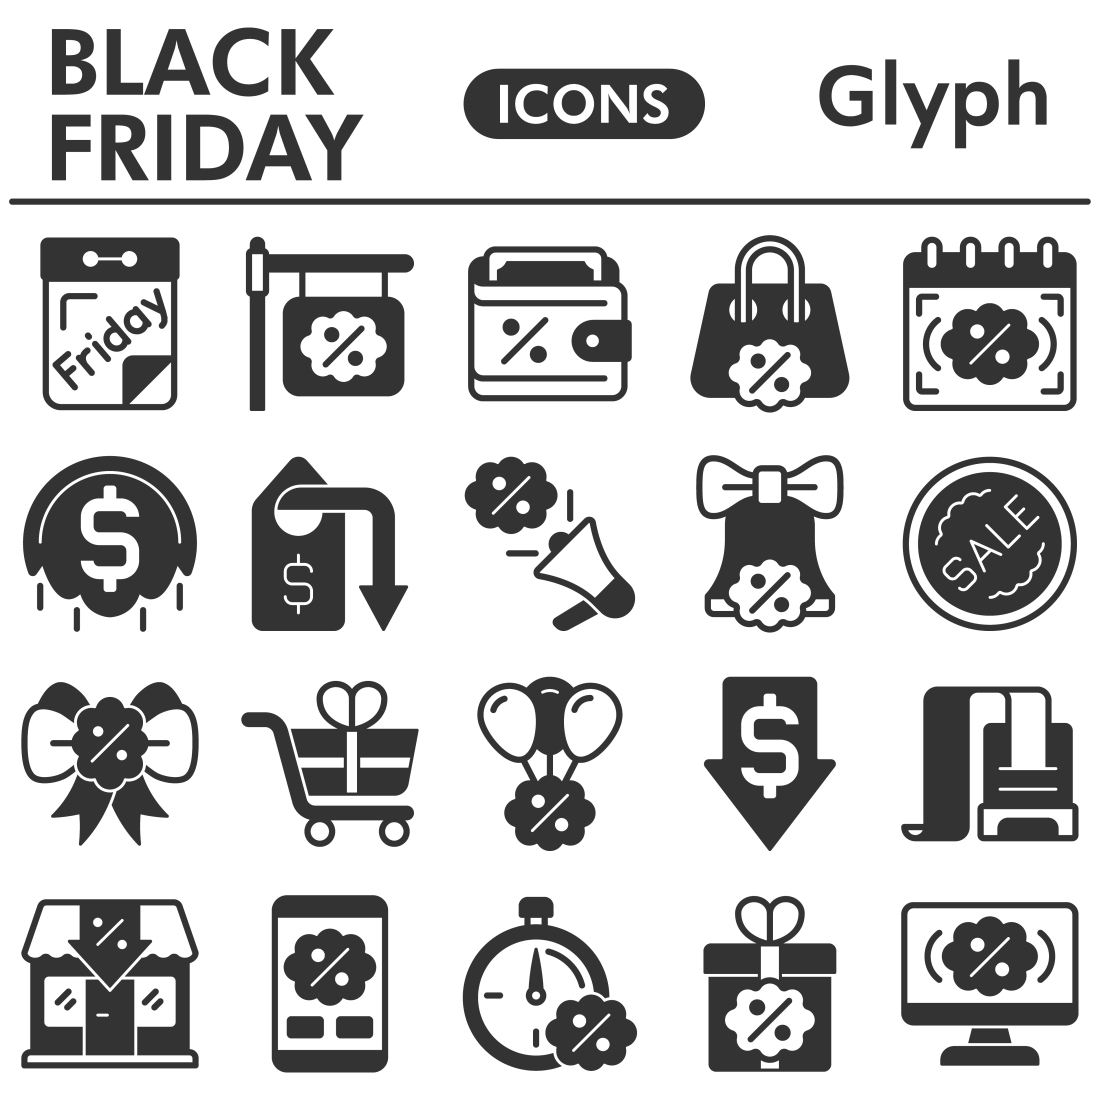 Black friday icons set, glyph style cover image.